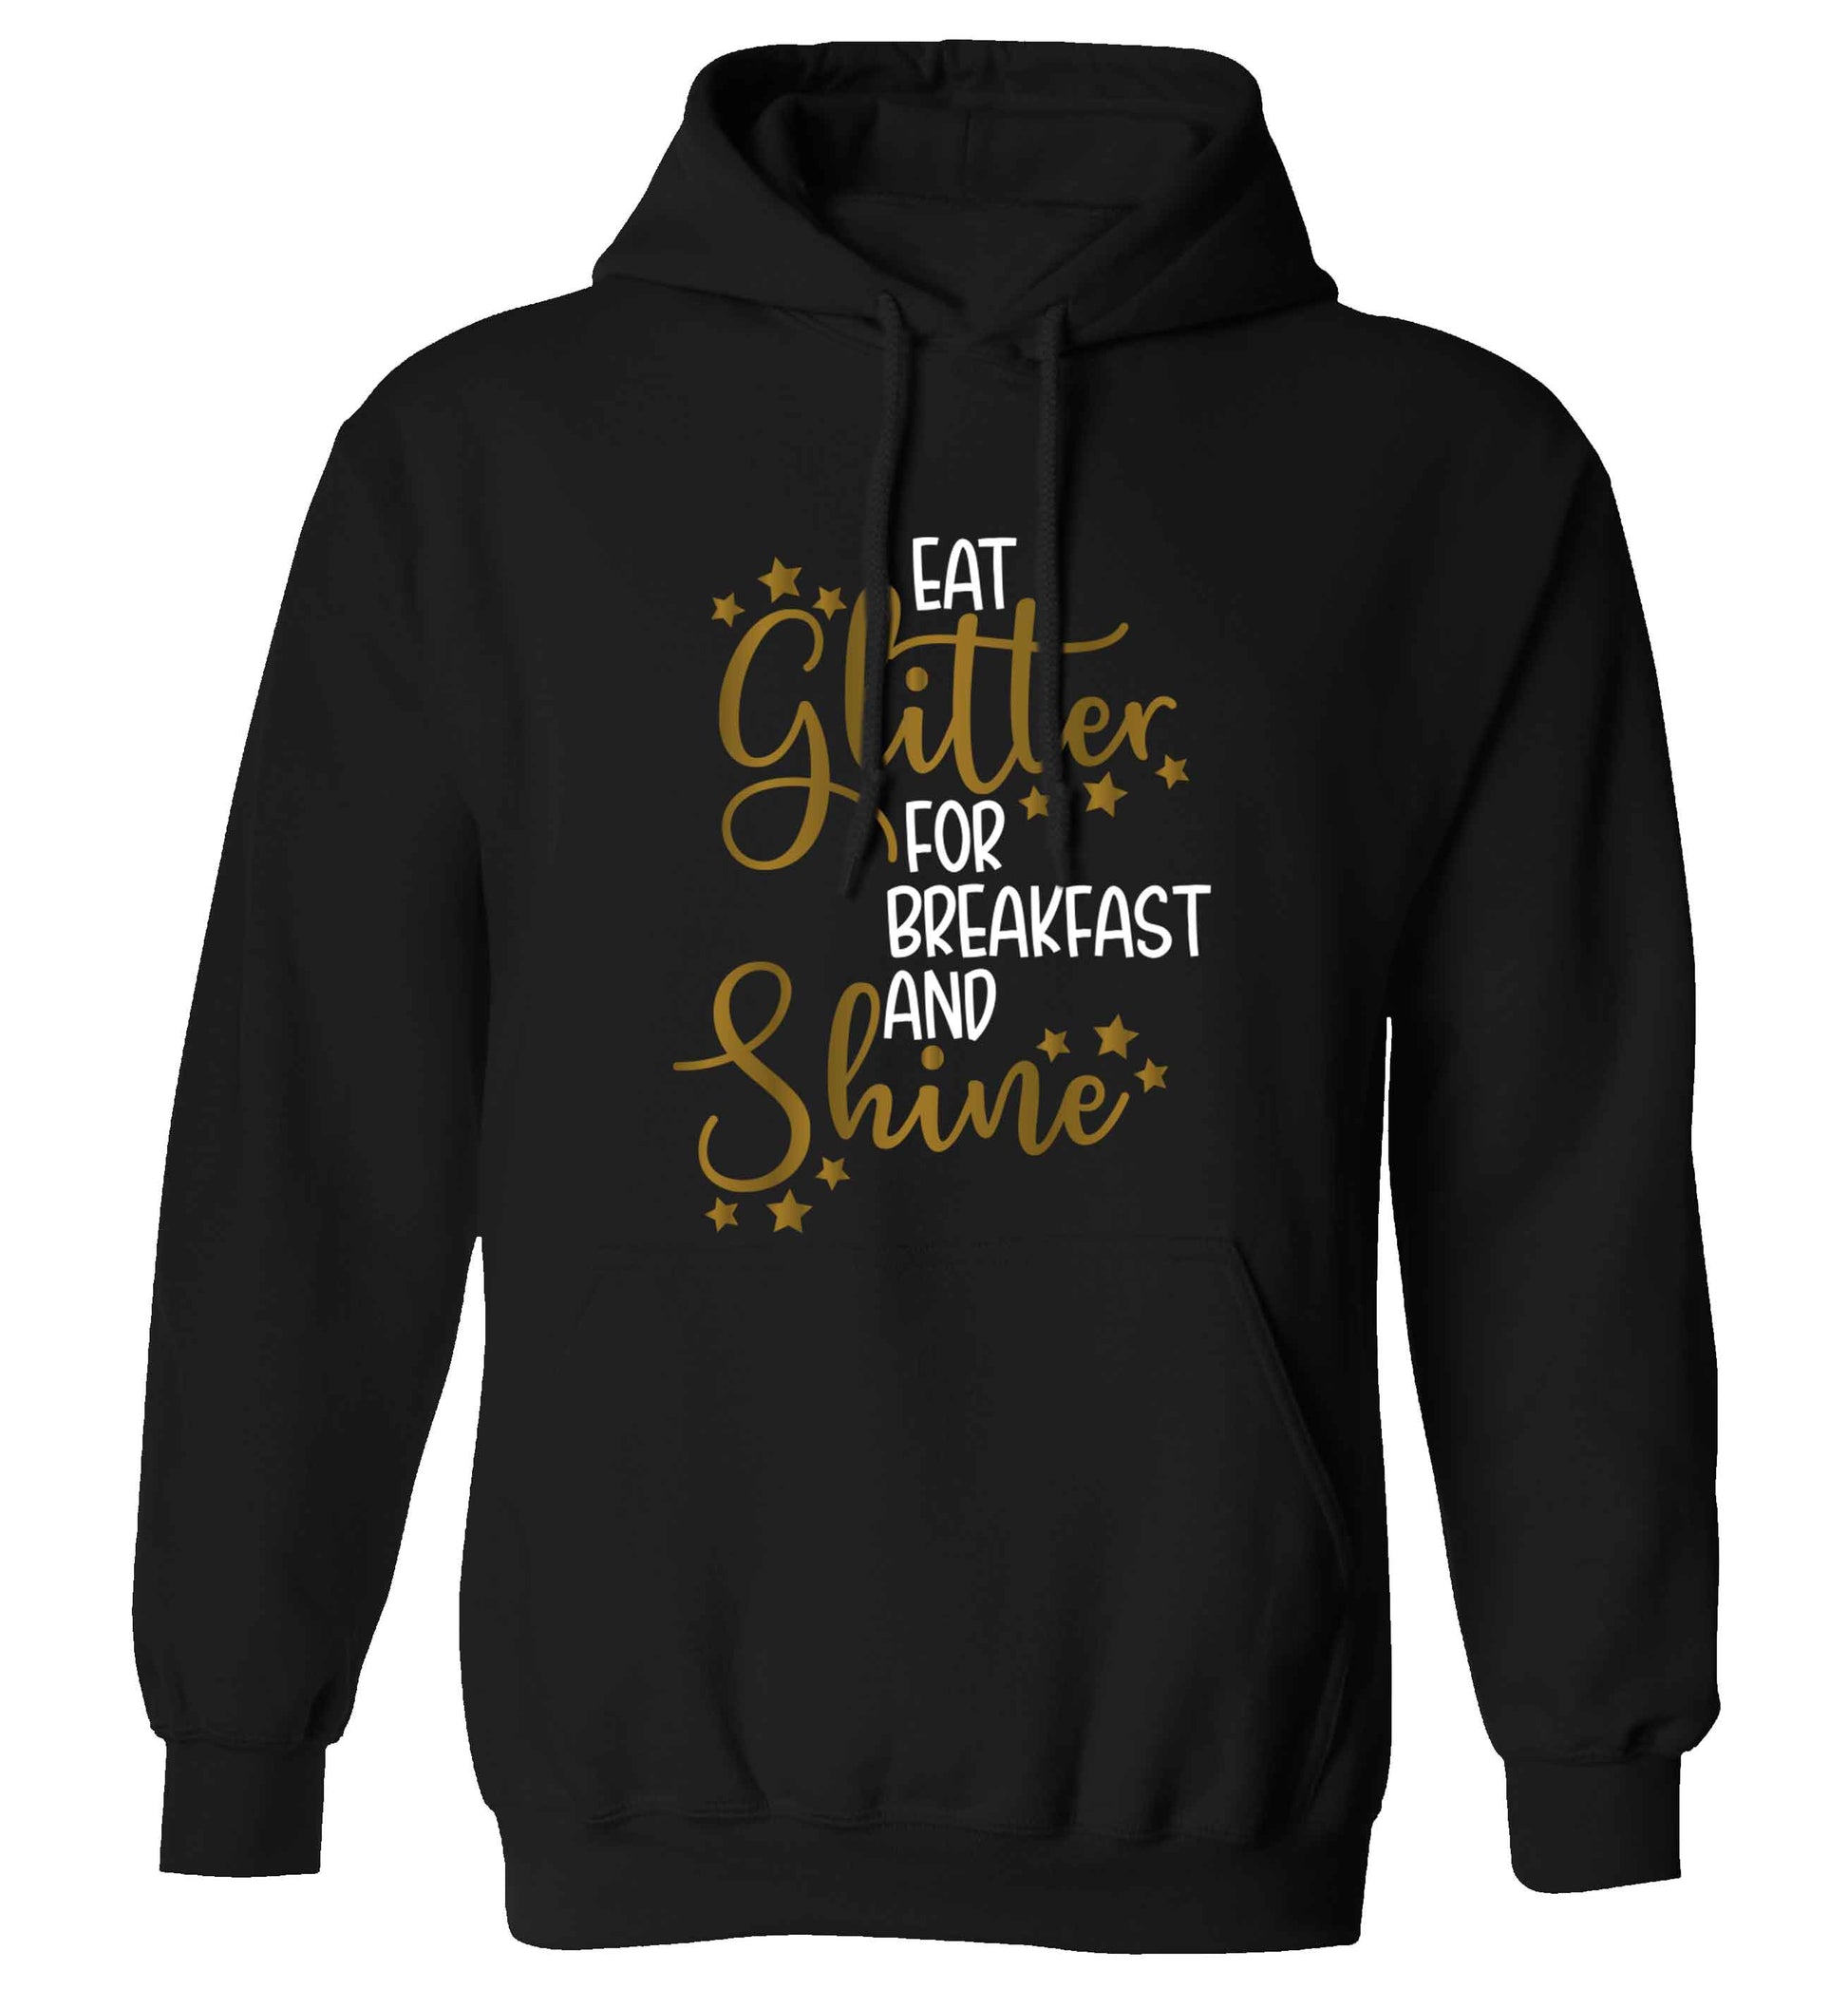 Eat glitter for breakfast and shine all day adults unisex black hoodie 2XL